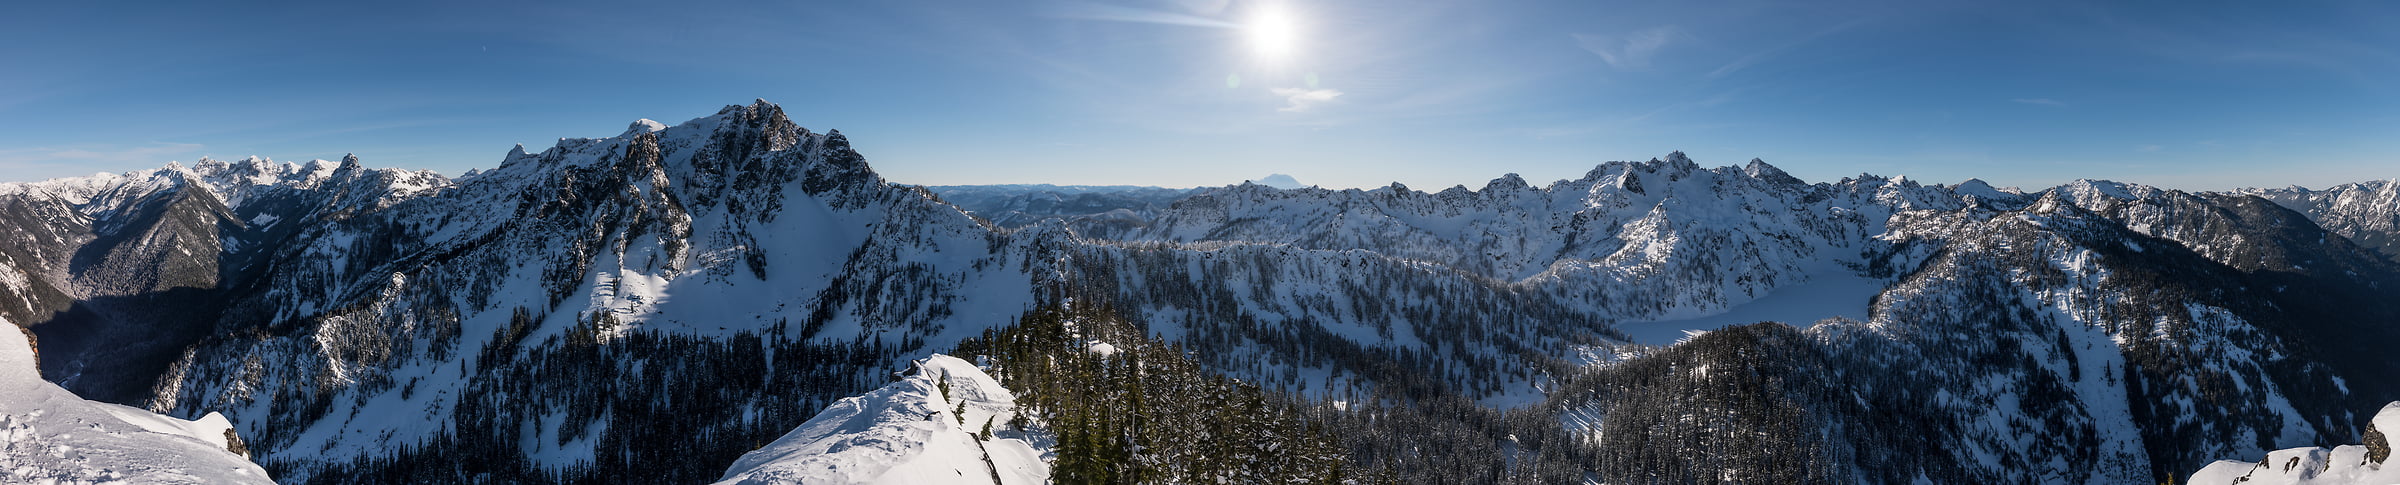 225 megapixels! An extremely high resolution, large-format VAST photo print of the Cascade Mountains from Avalanche Mountain in Snoqualmie Pass; fine art panorama landscape photo created by Scott Rinckenberger in Washington, USA.